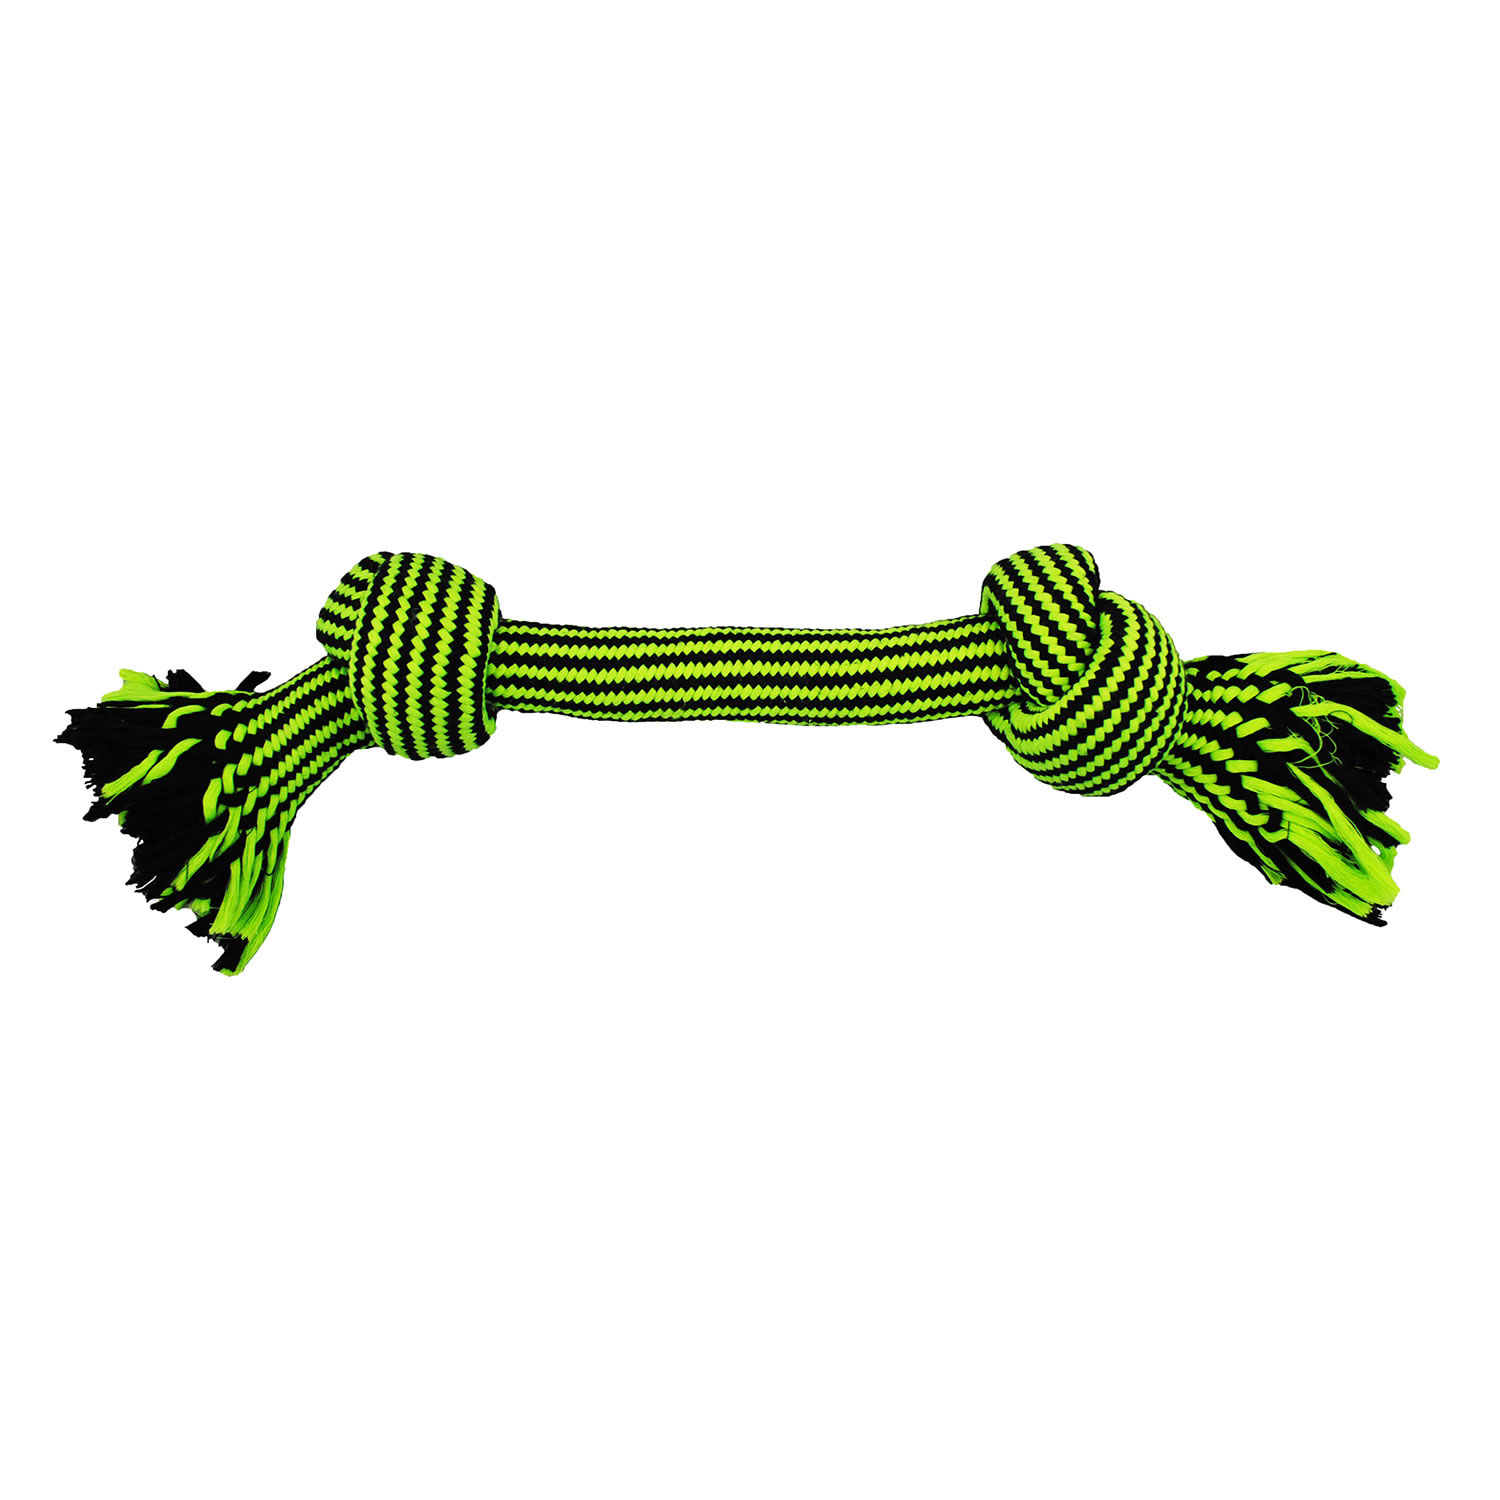 JOLLY PETS KNOT-N-CHEW 2 KNOT ROPE LARGE/XLARGE GREEN/BLACK 2 KNOT